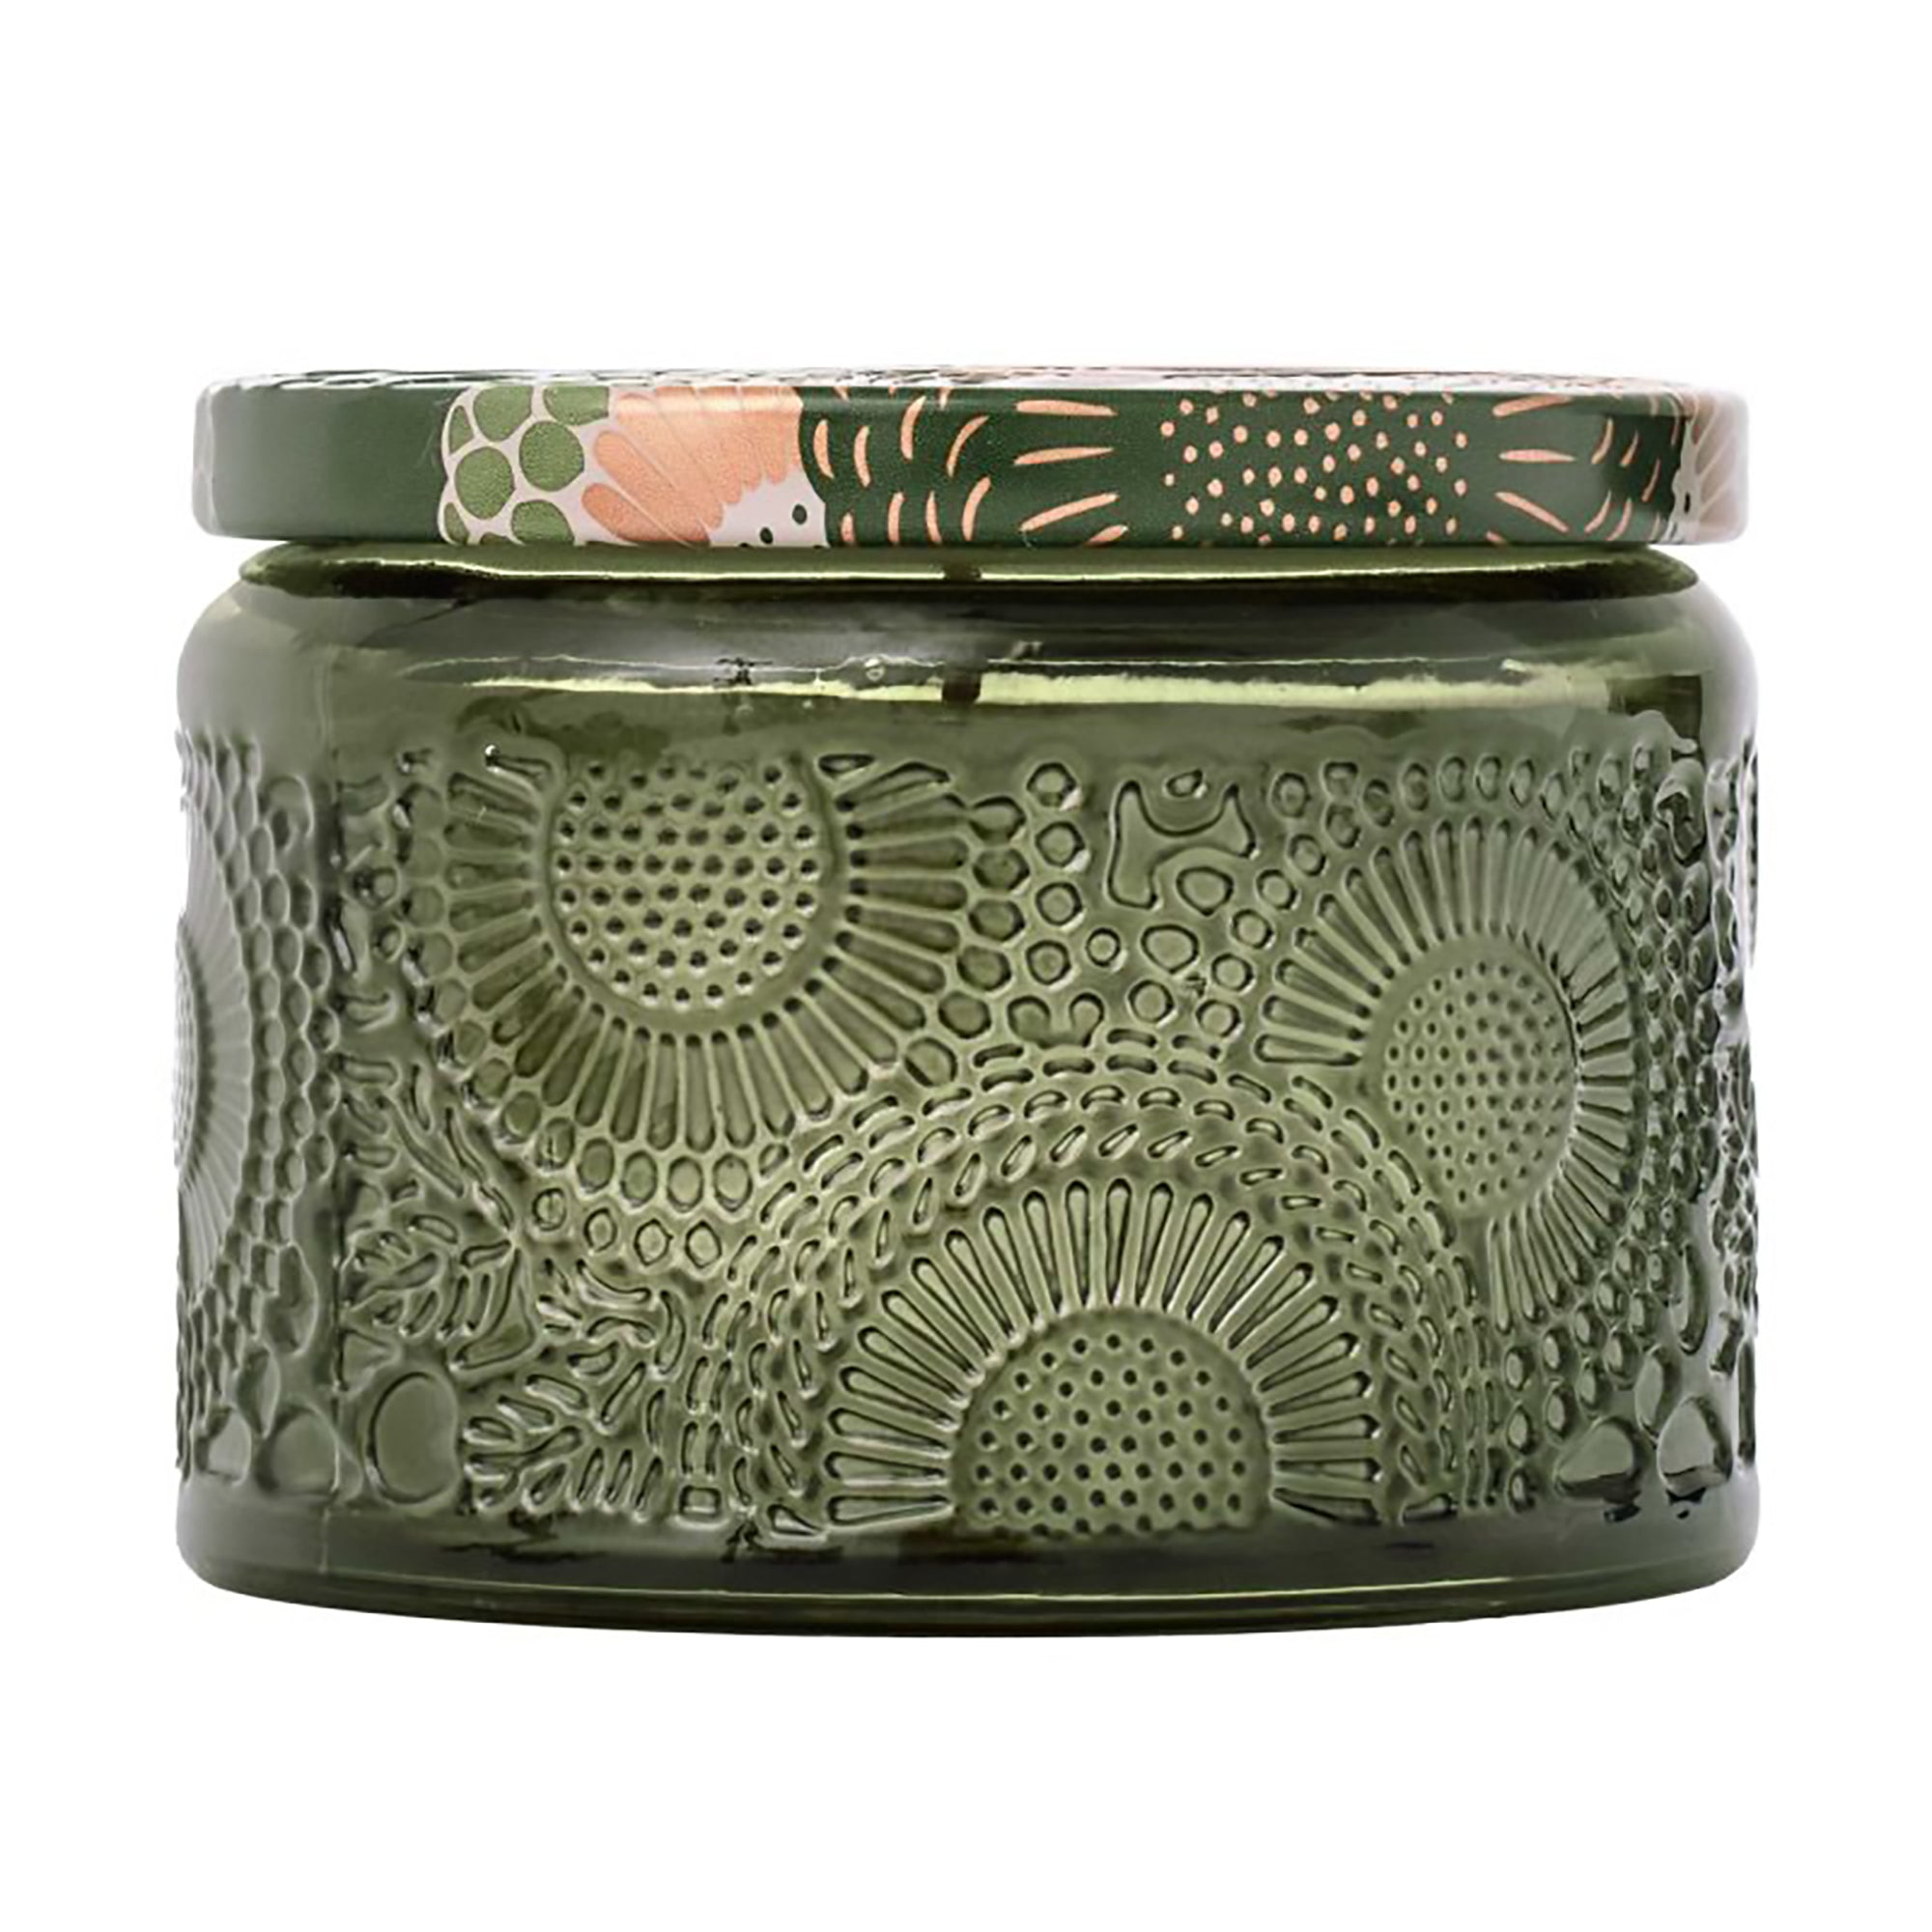 Voluspa Japonica Petite Embossed Glass Jar Candle / Temple Moss